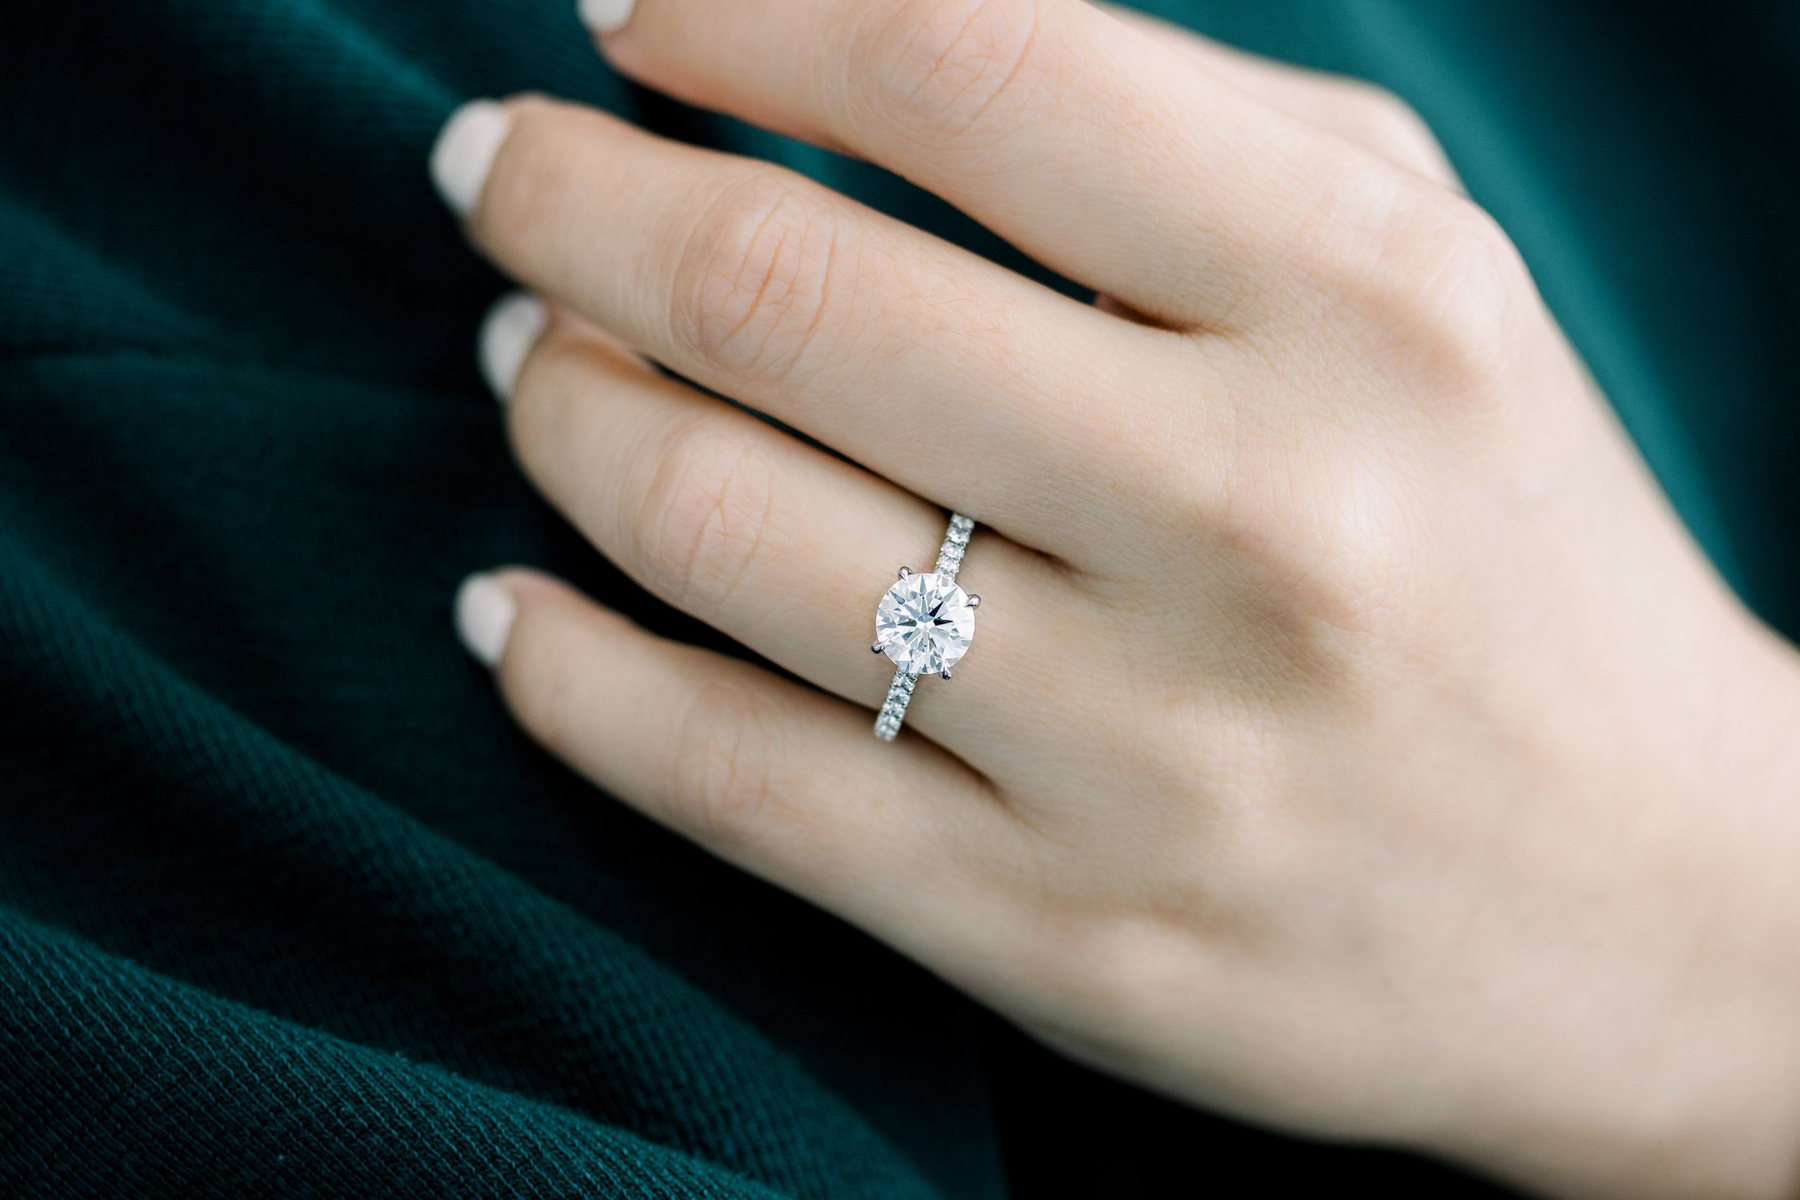 Platinum Diamond Rings - Discover Their Elegance And Durability